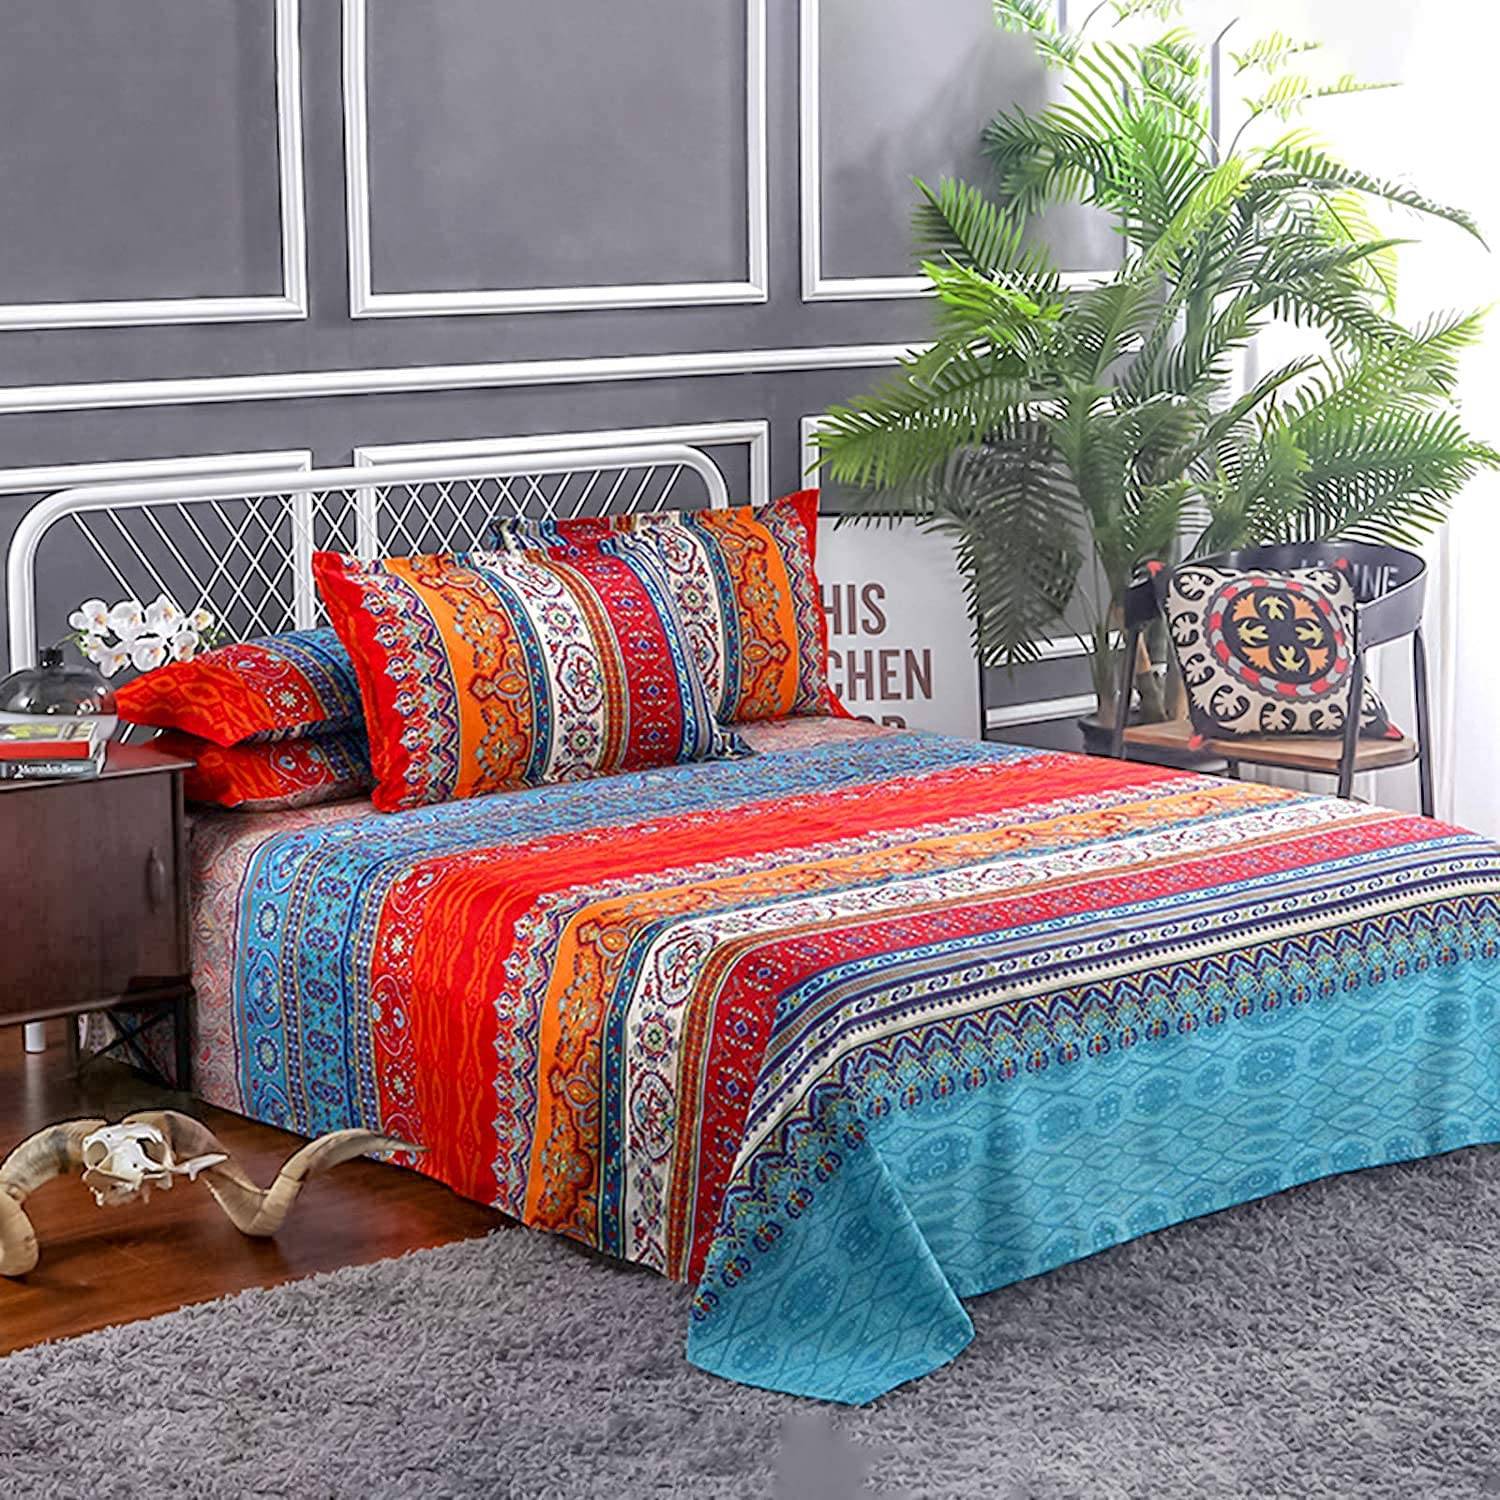 Boho printed bed sheets and pillow cases on bed